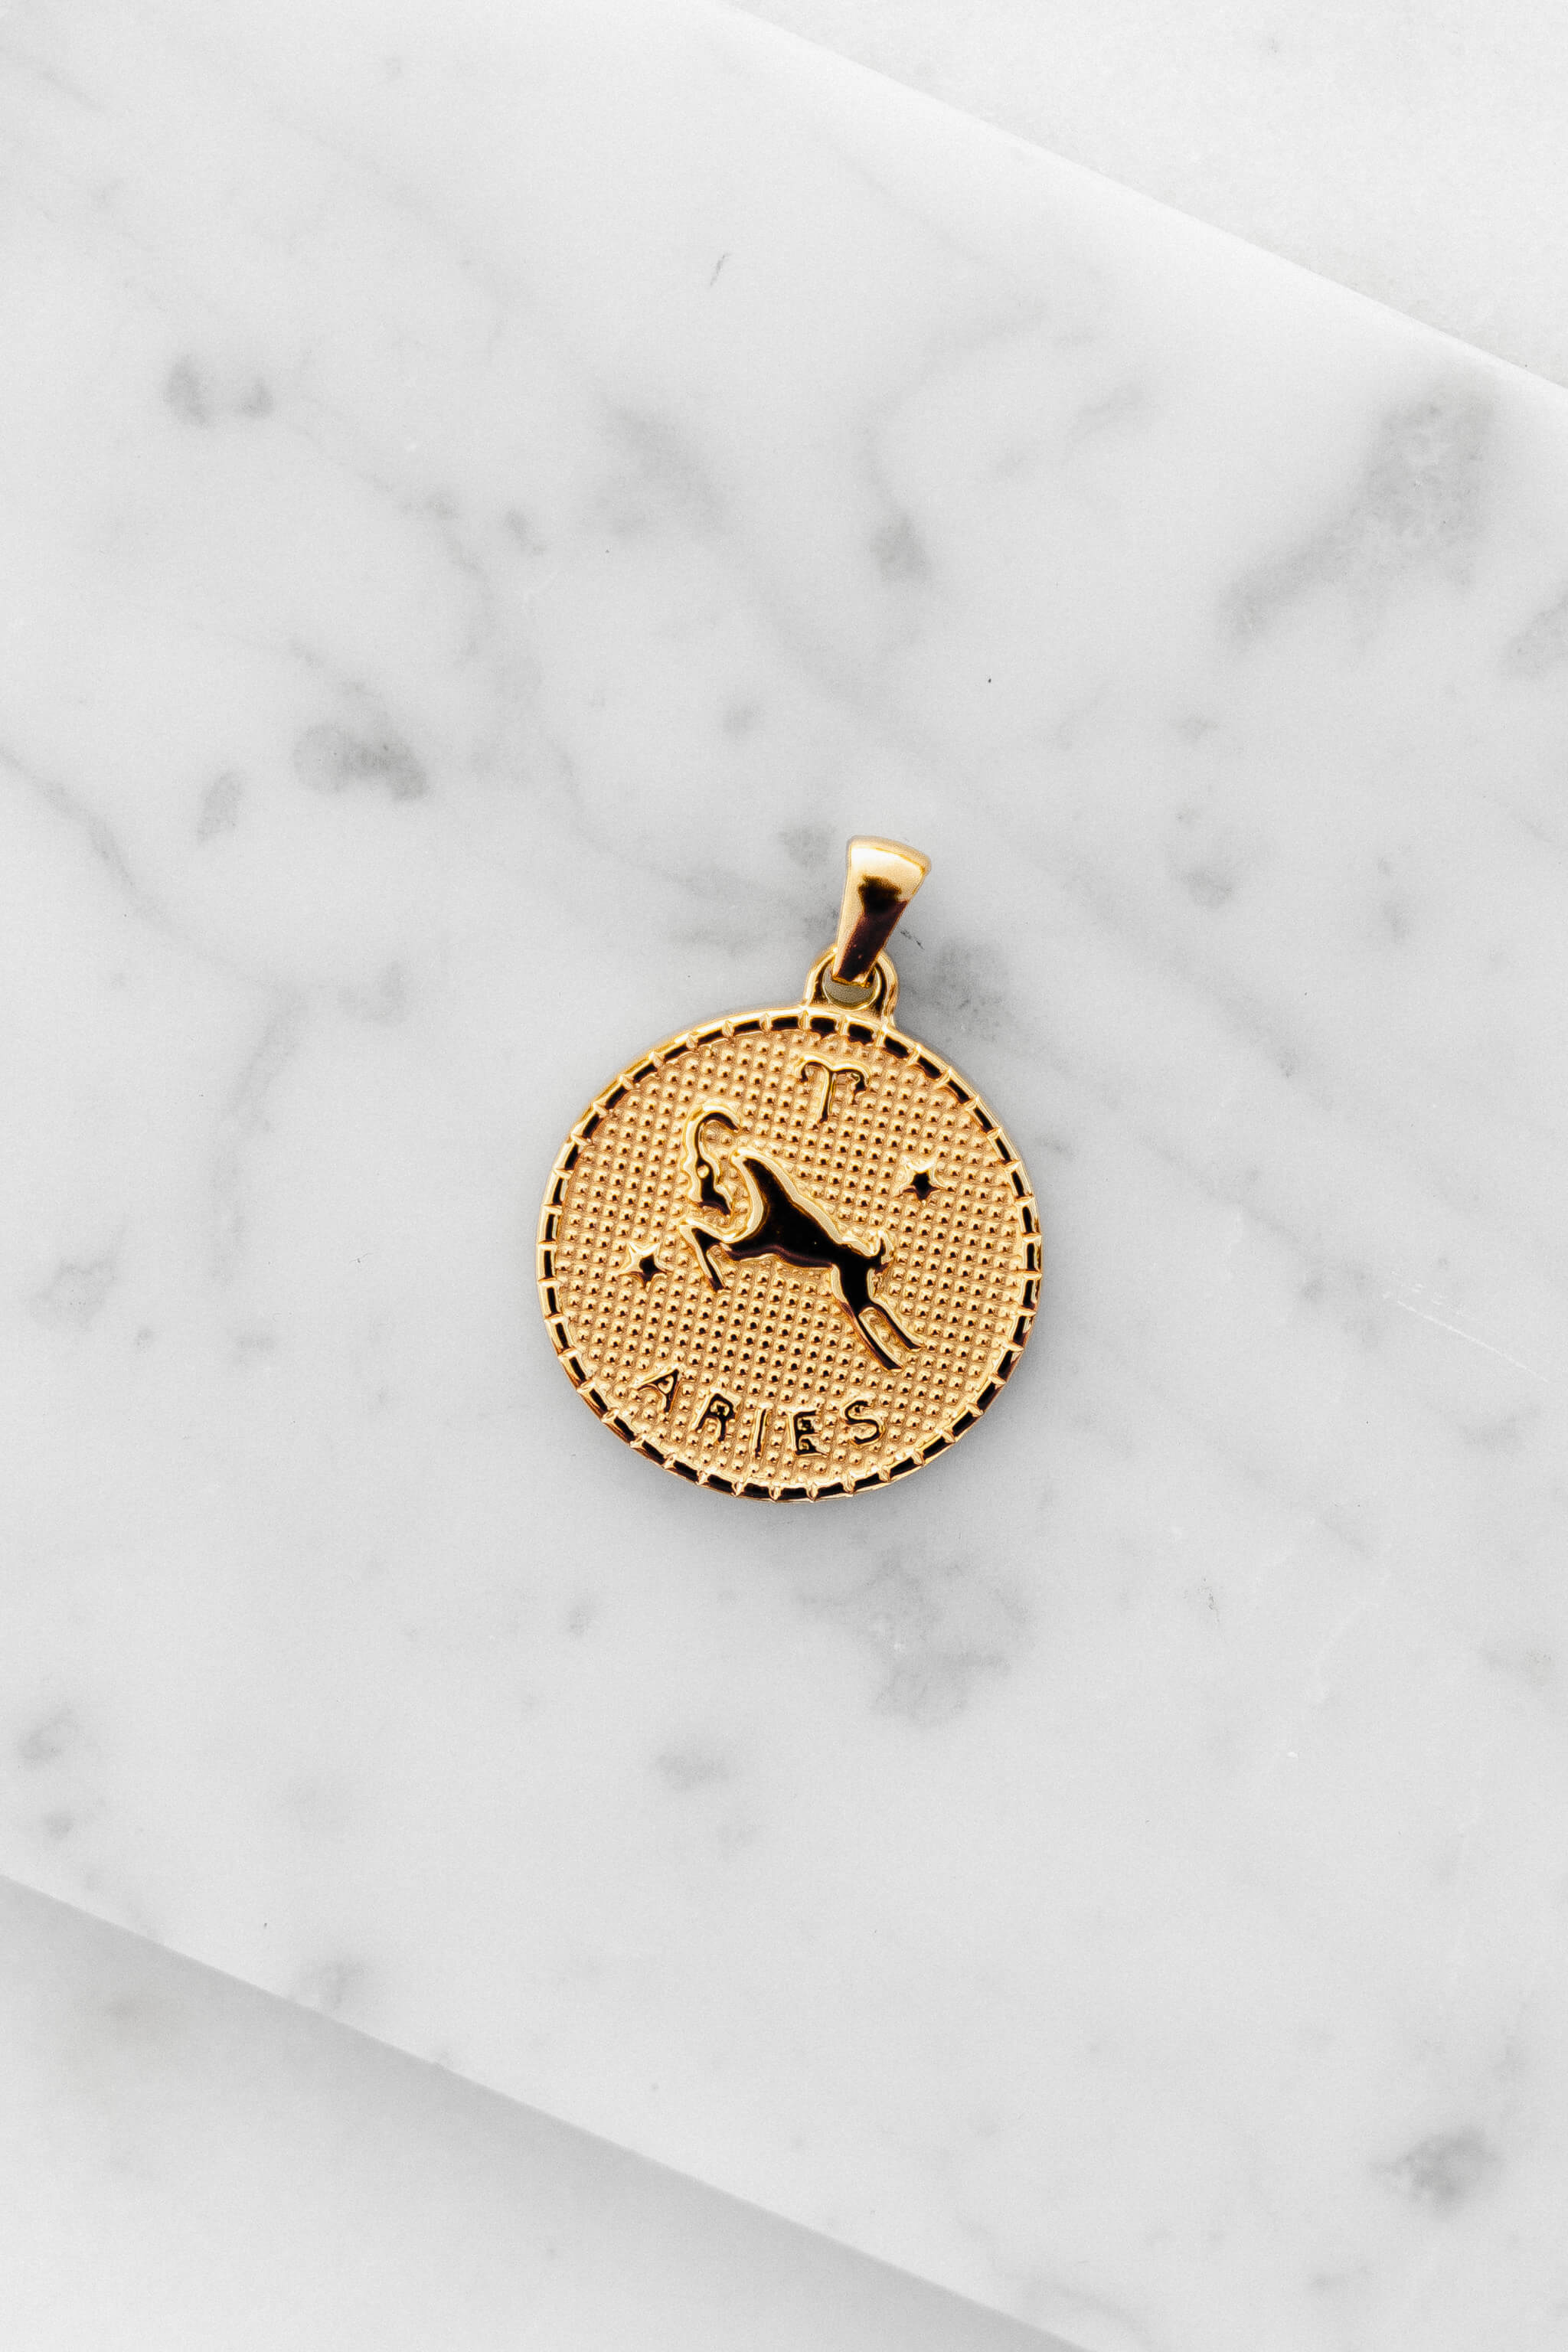 Aries zodiac sign gold coin charm laying on a white marble